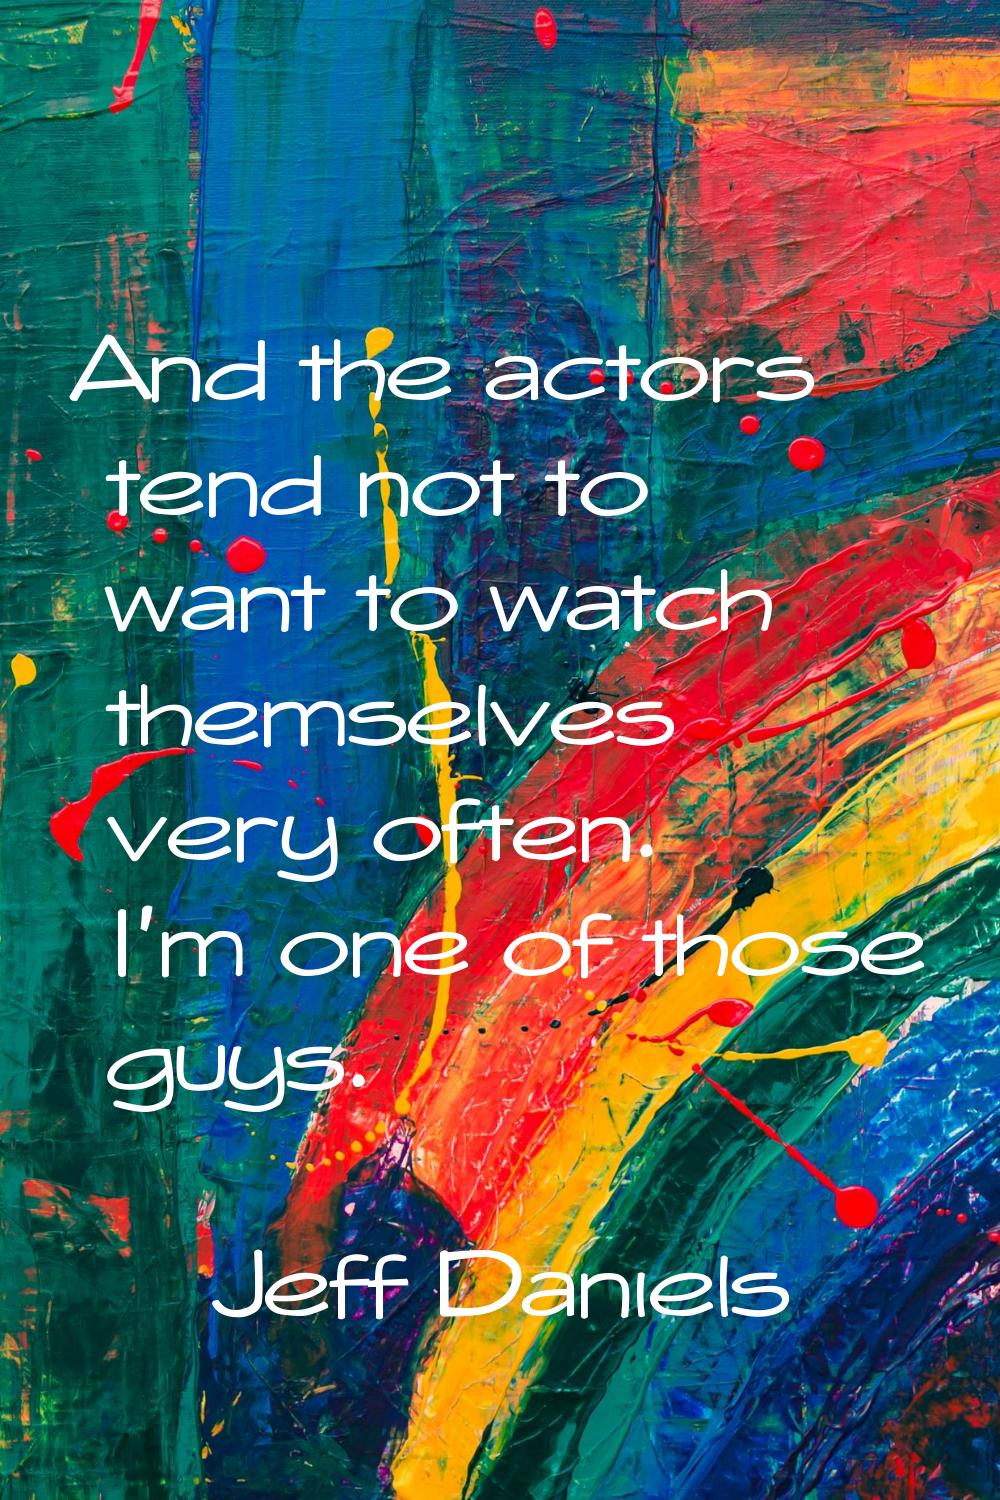 And the actors tend not to want to watch themselves very often. I'm one of those guys.